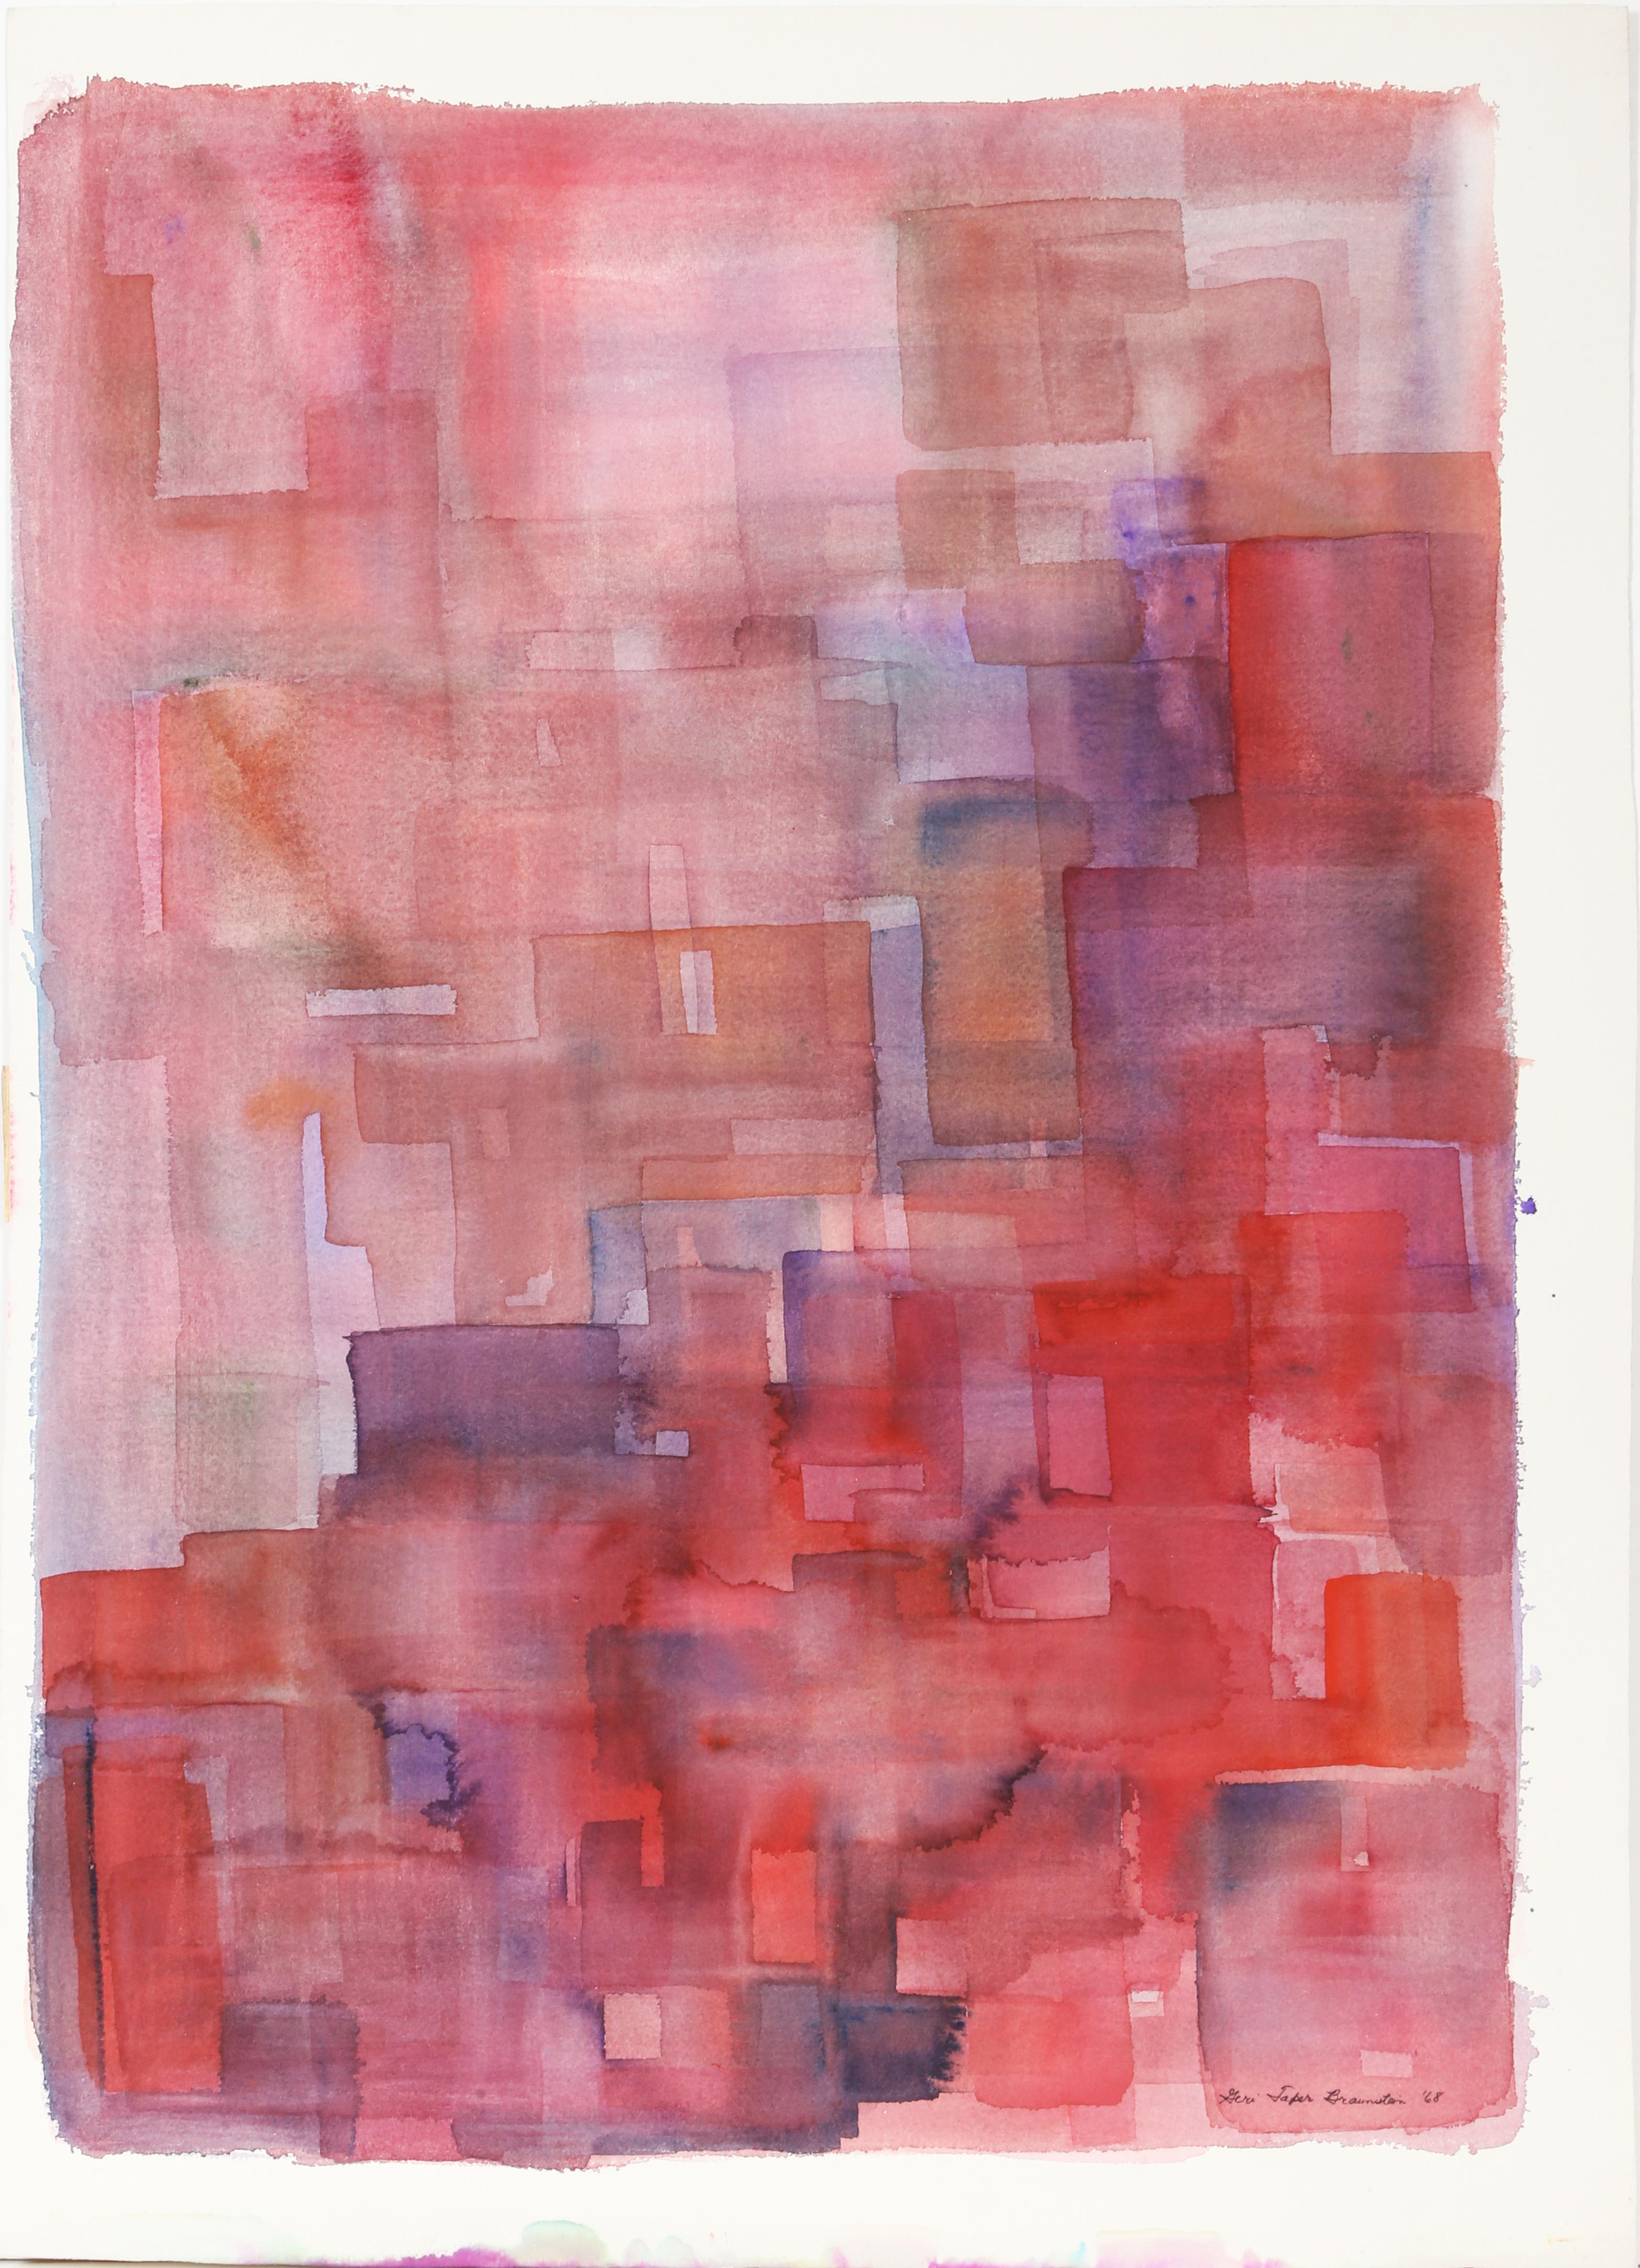 A simple red and purple composition with watercolor on Arches paper by Geri Taper. This piece has a slight geometric repeating motif throughout it. The work is signed, titled, and dated in pencil by the artist.

Caged
Geri Taper, American